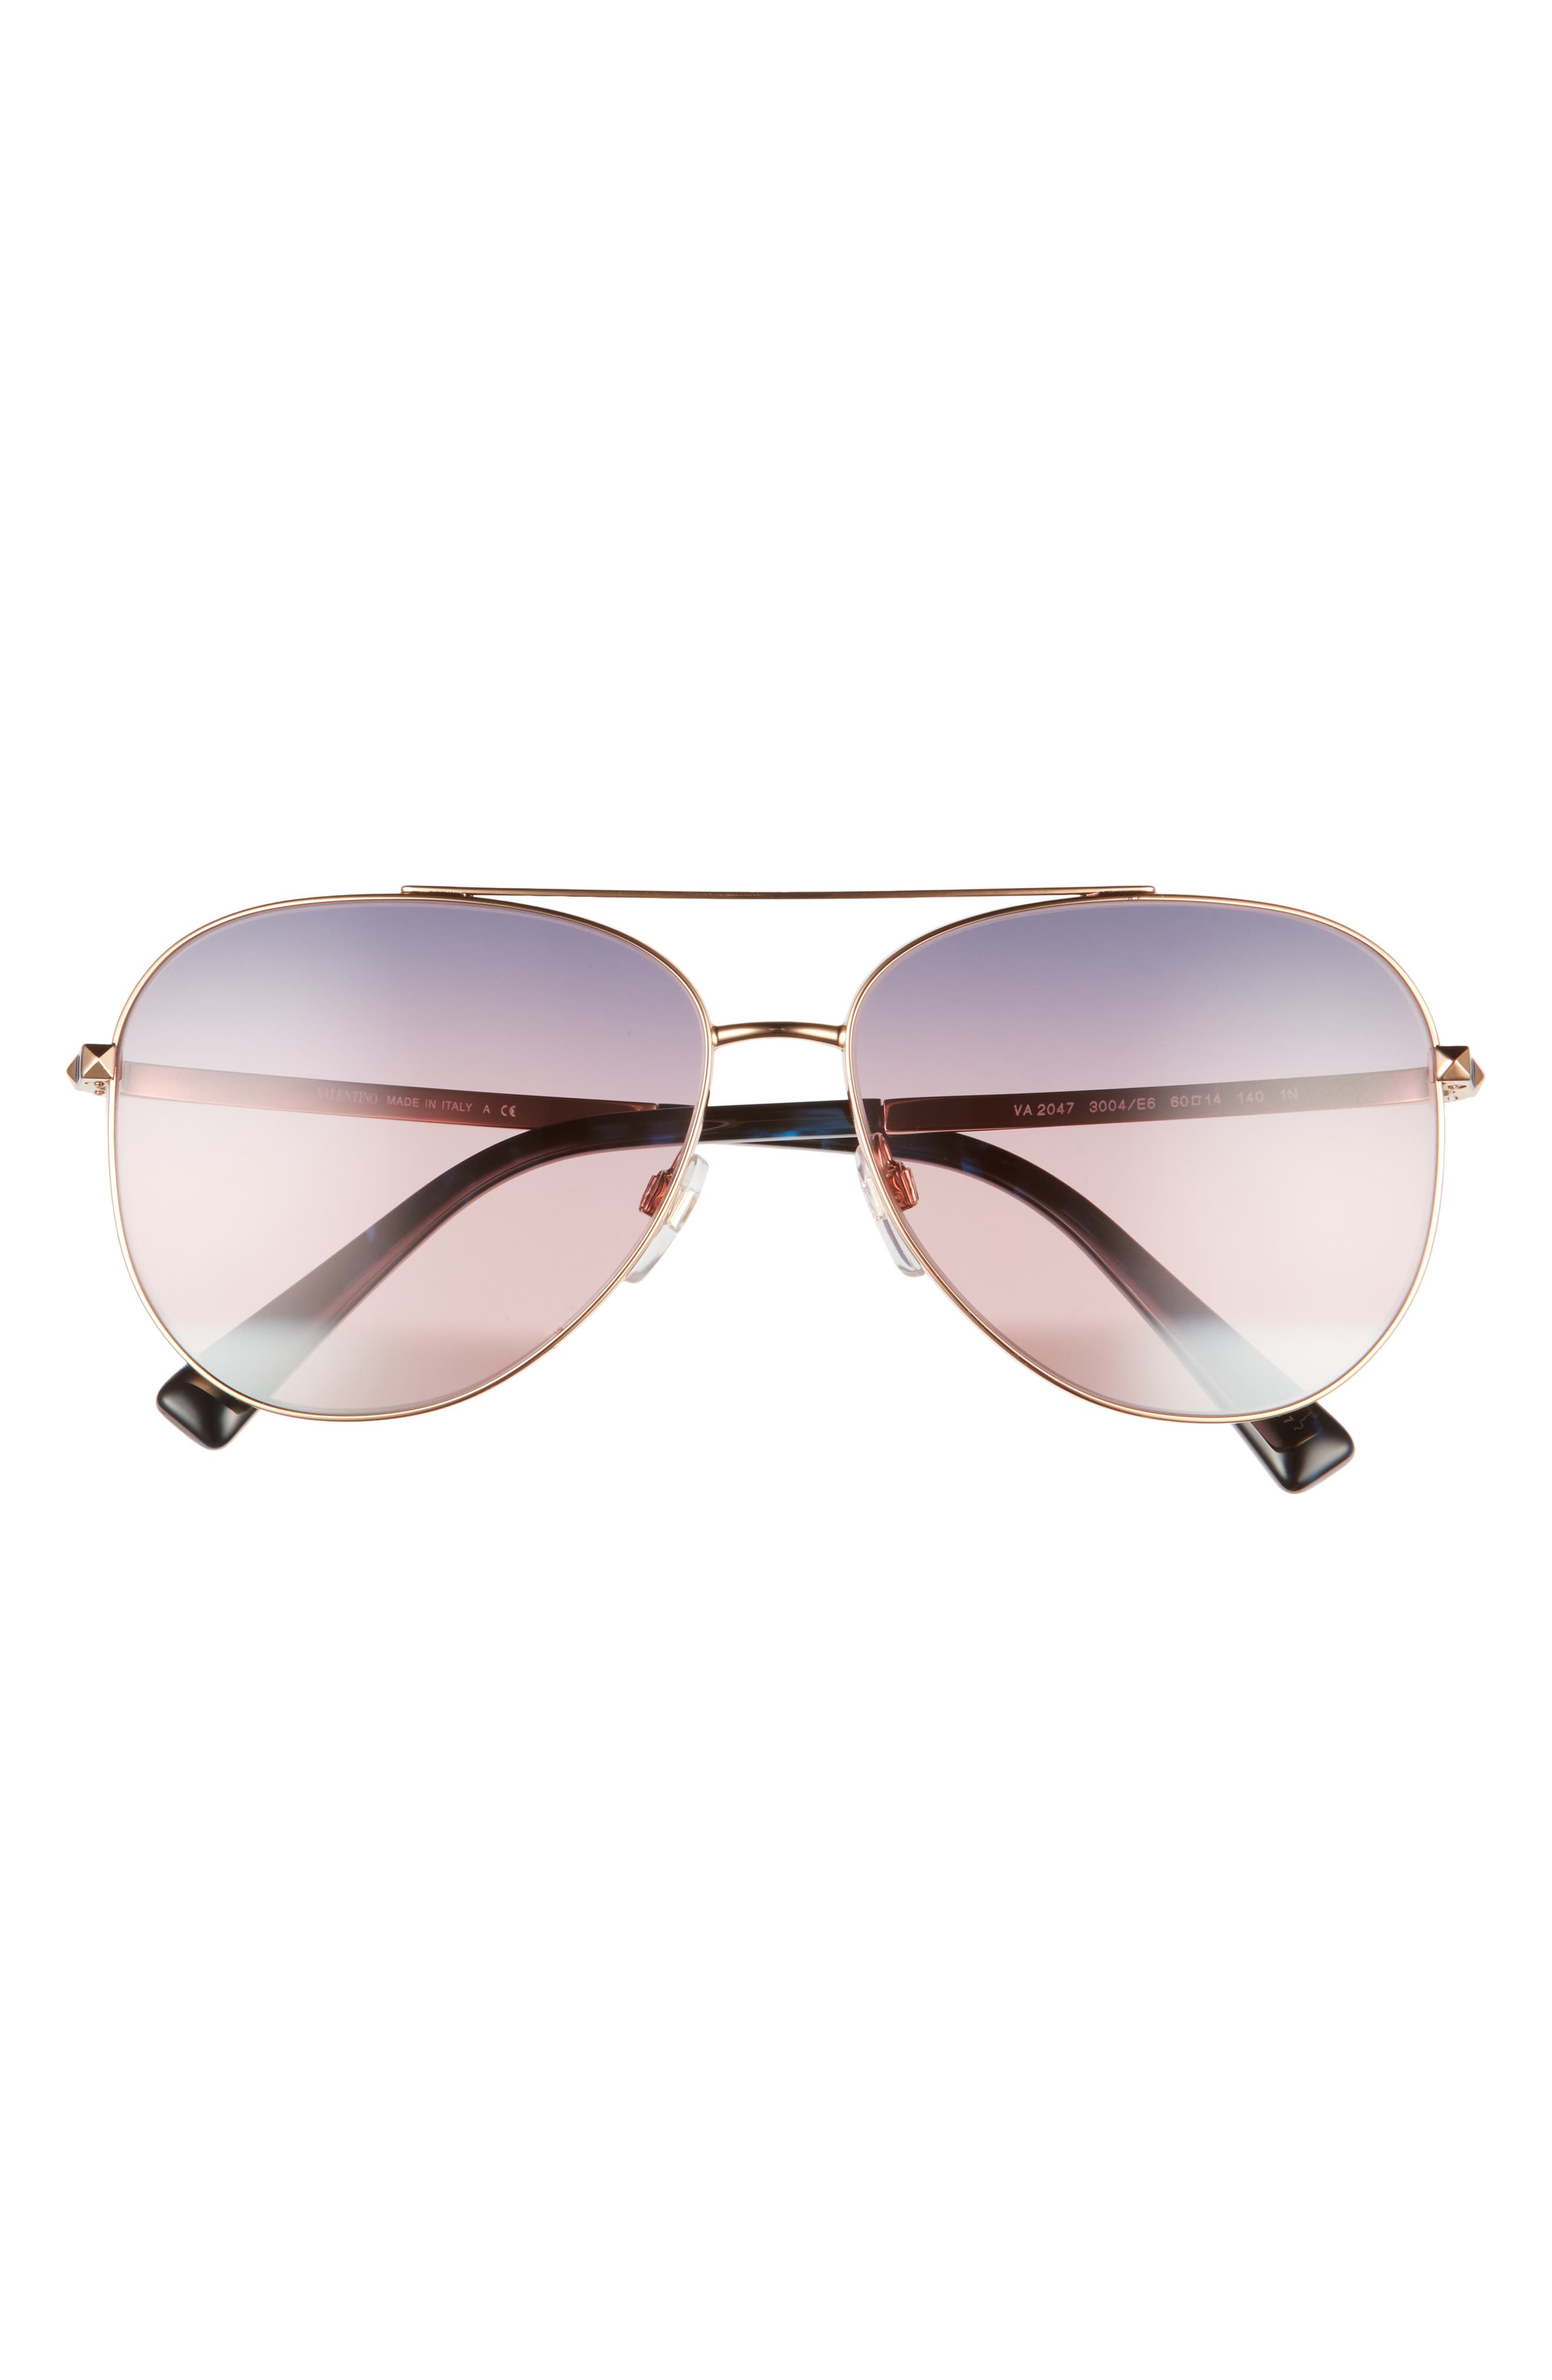 Valentino 60mm Aviator Sunglasses in Rose Gold/Tris Blue Pink at Nordstrom